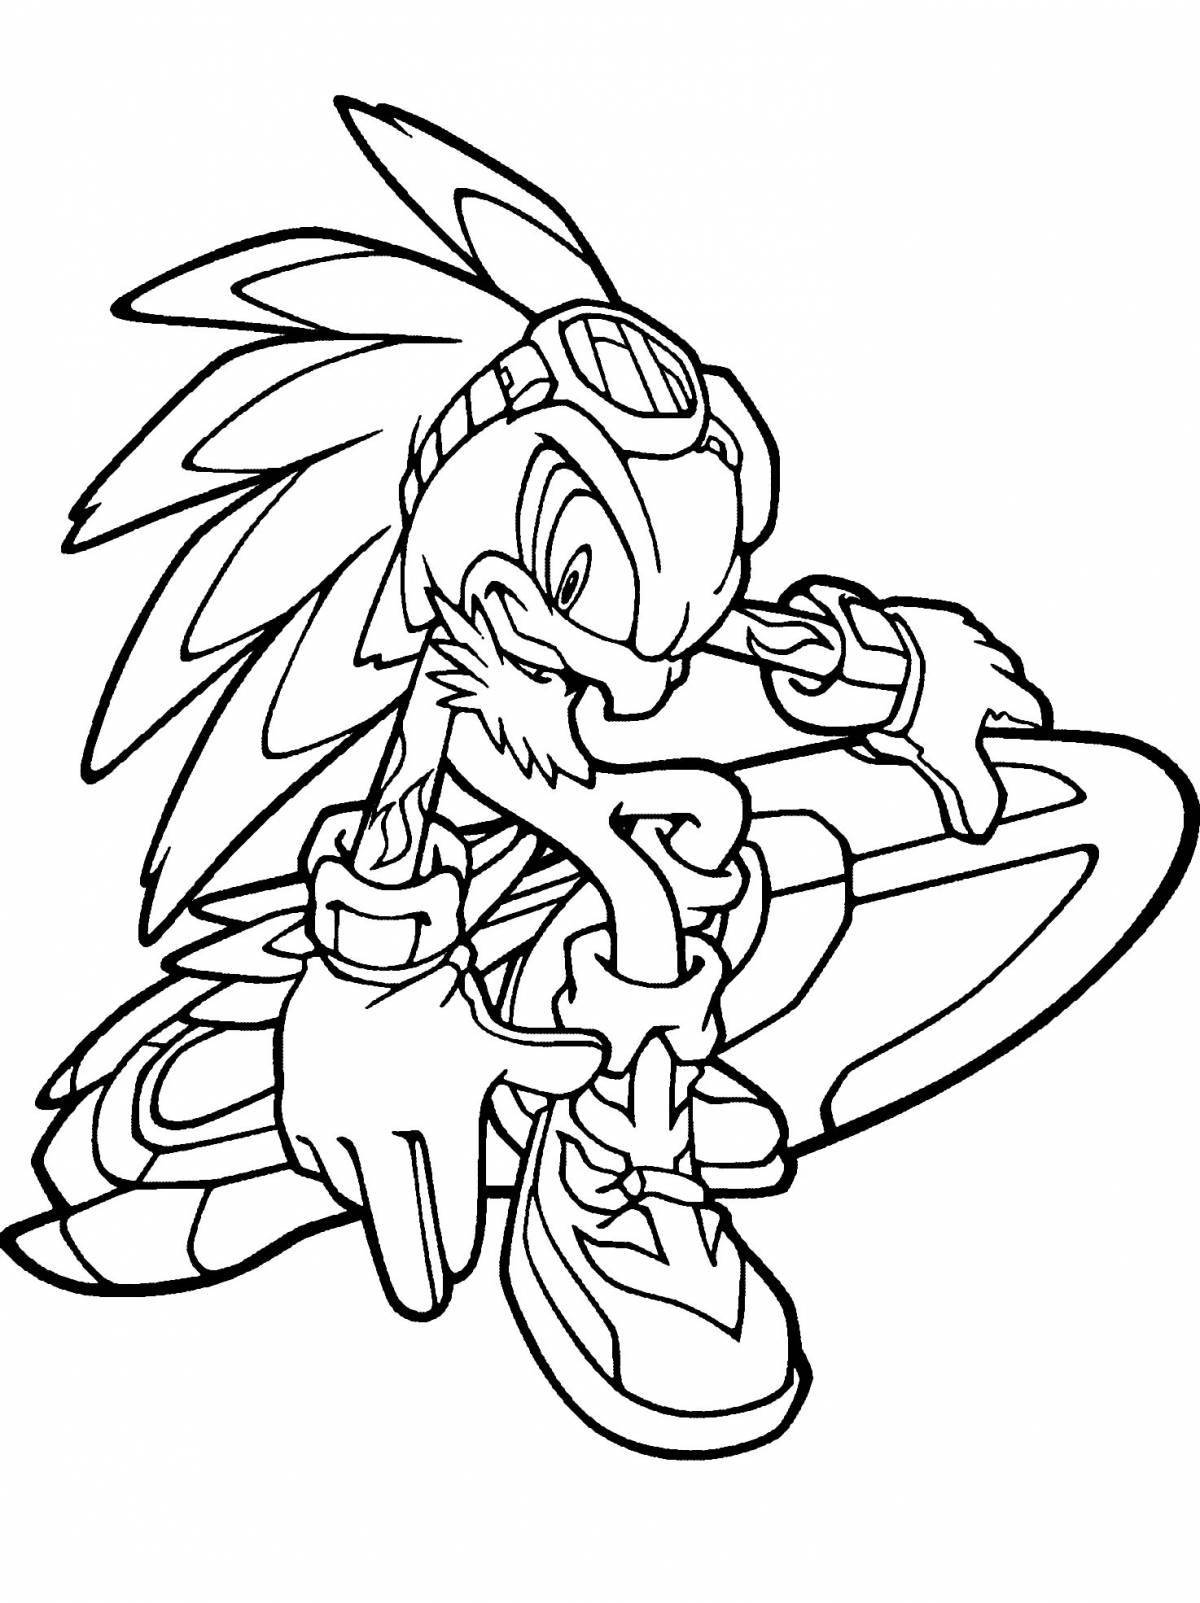 Sonic fun coloring page